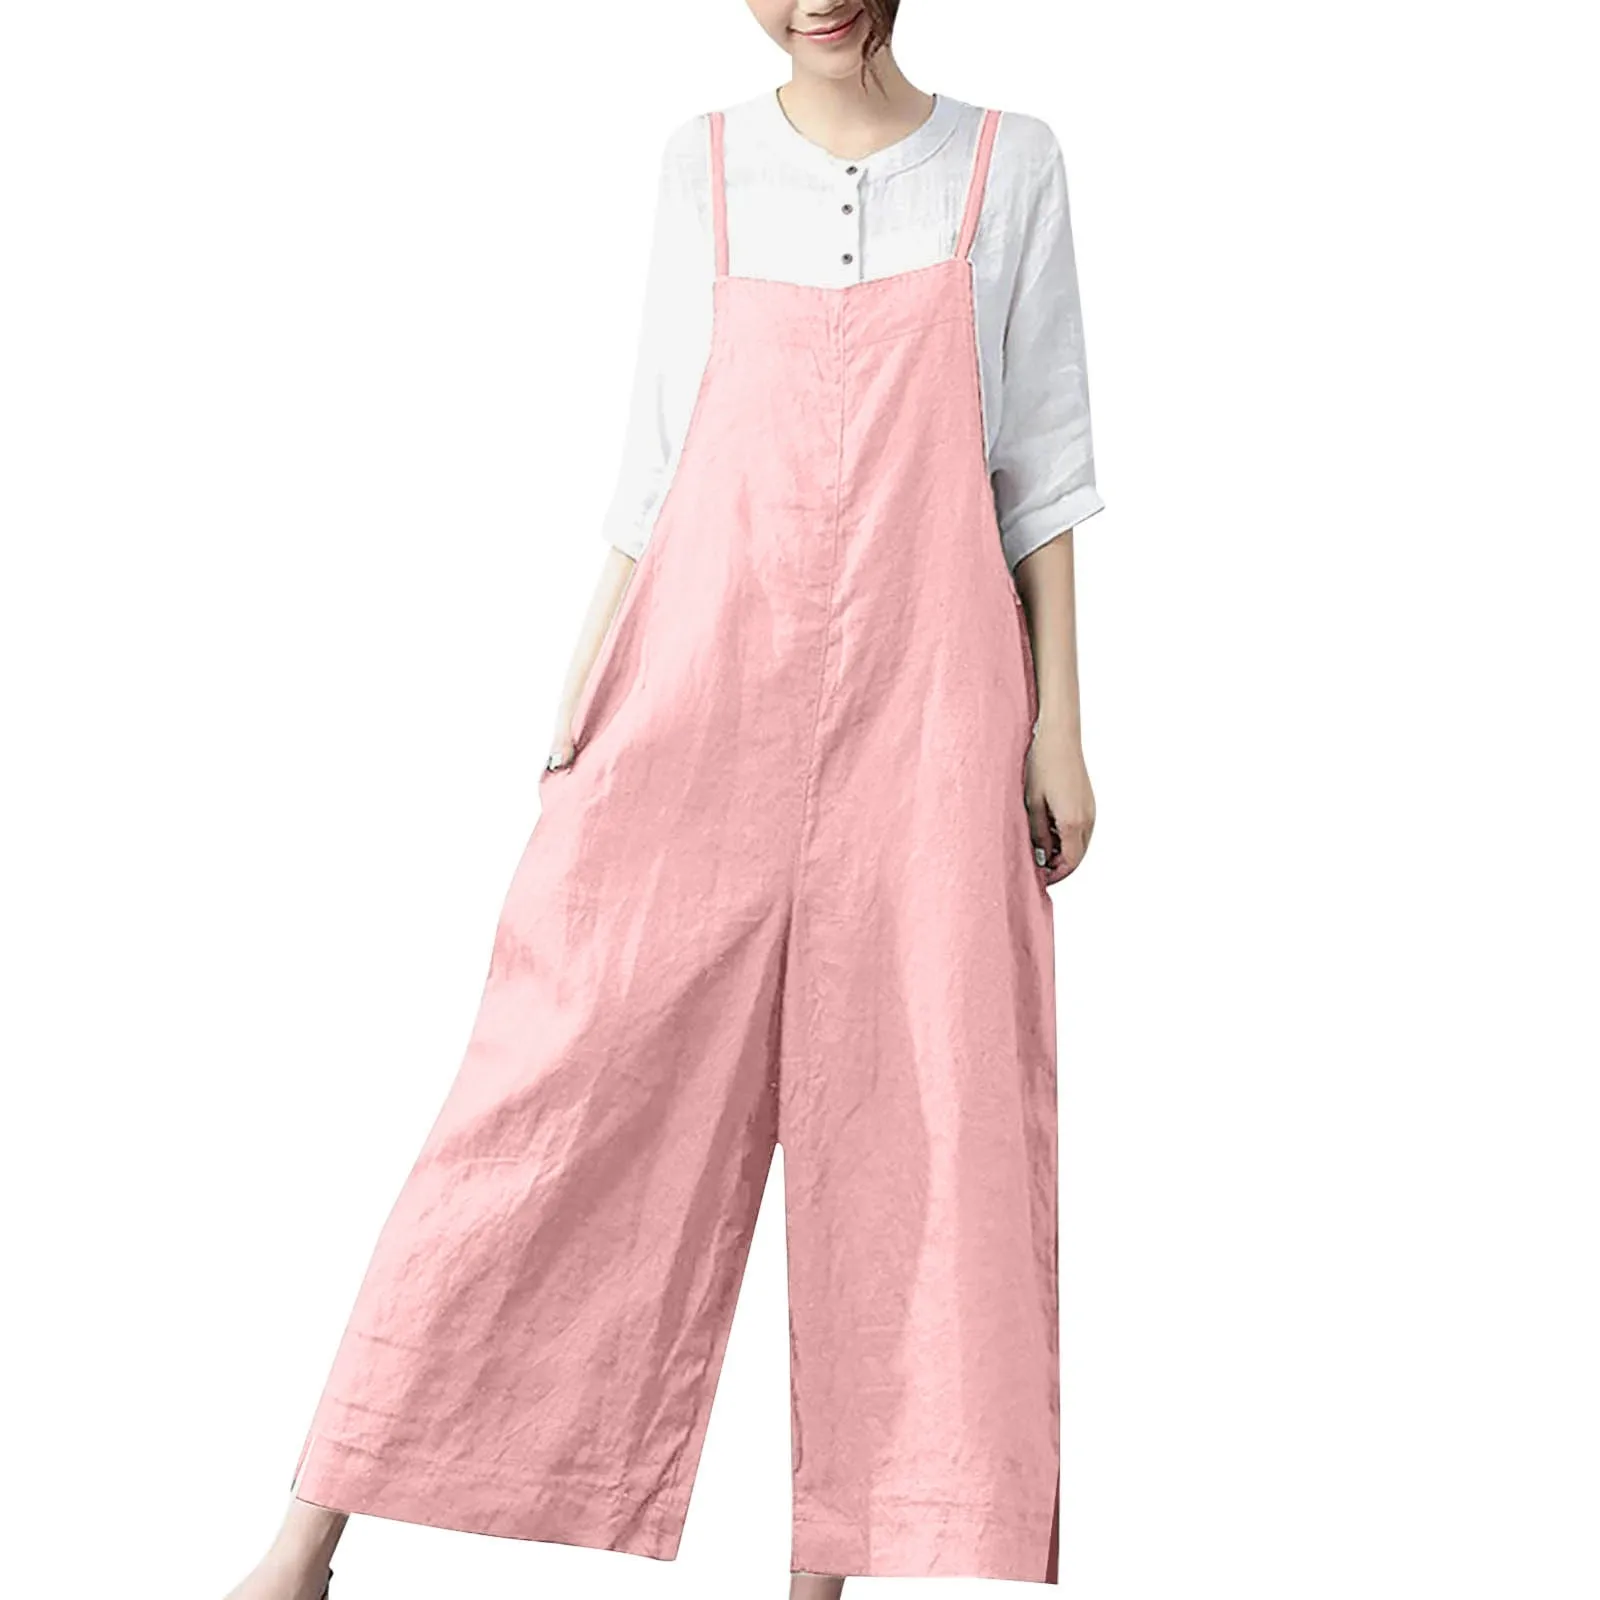 Casual Loose Jumpsuit Women Summer Solid  Straps Wide Leg Long Pants Overalls Sleeveless Oversized Jumpsuits summer rompers for womens solid color adjustable straps overalls jumpsuit lady teen girls sleeveless shorts jumpsuit with pocket